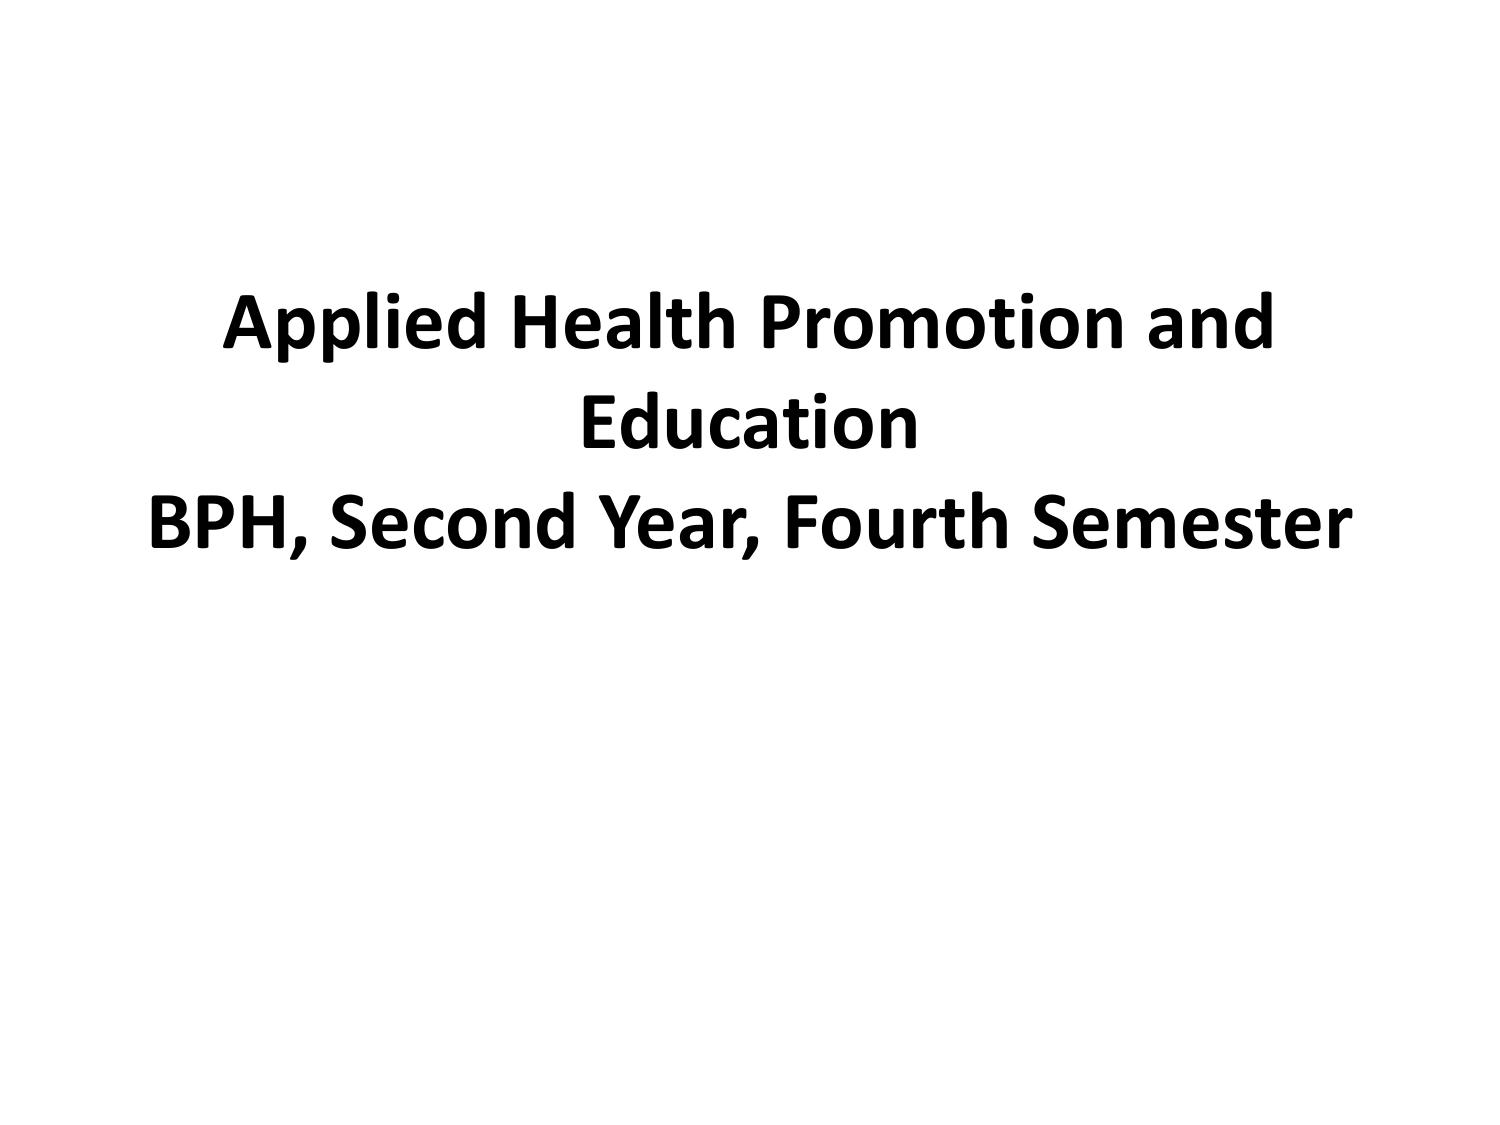 Applied Health Promotion and Education 2014